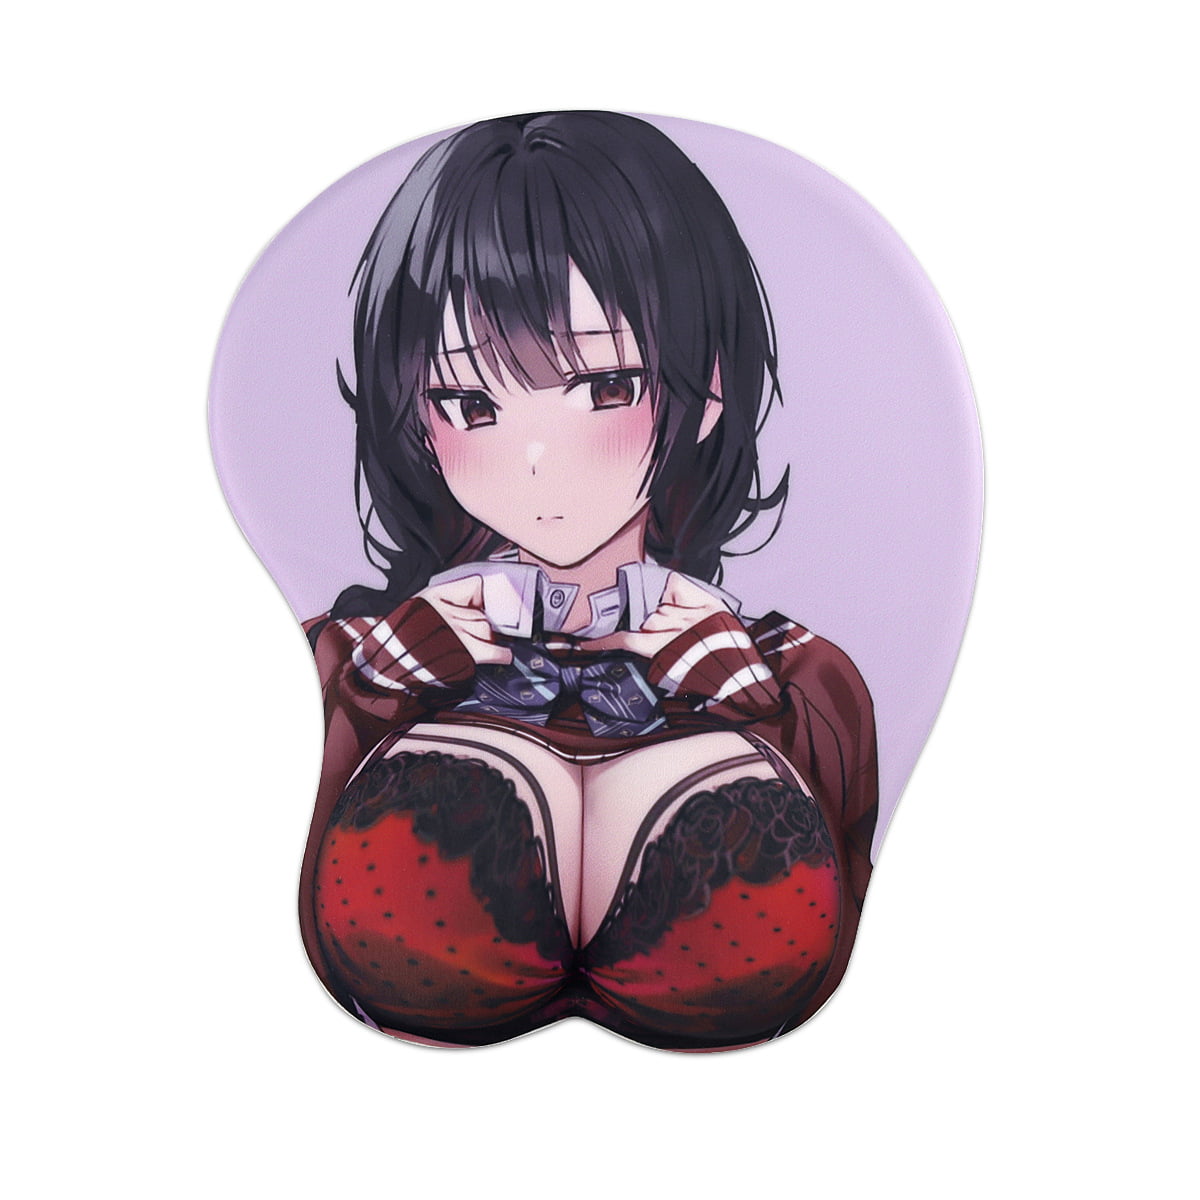 Cute Soft Sexy Cartoon Girl 3D Big Breast Boobs Silicone Wrist Rest Support  Mouse Pad Mat Gaming Mousepad-RJ-028 